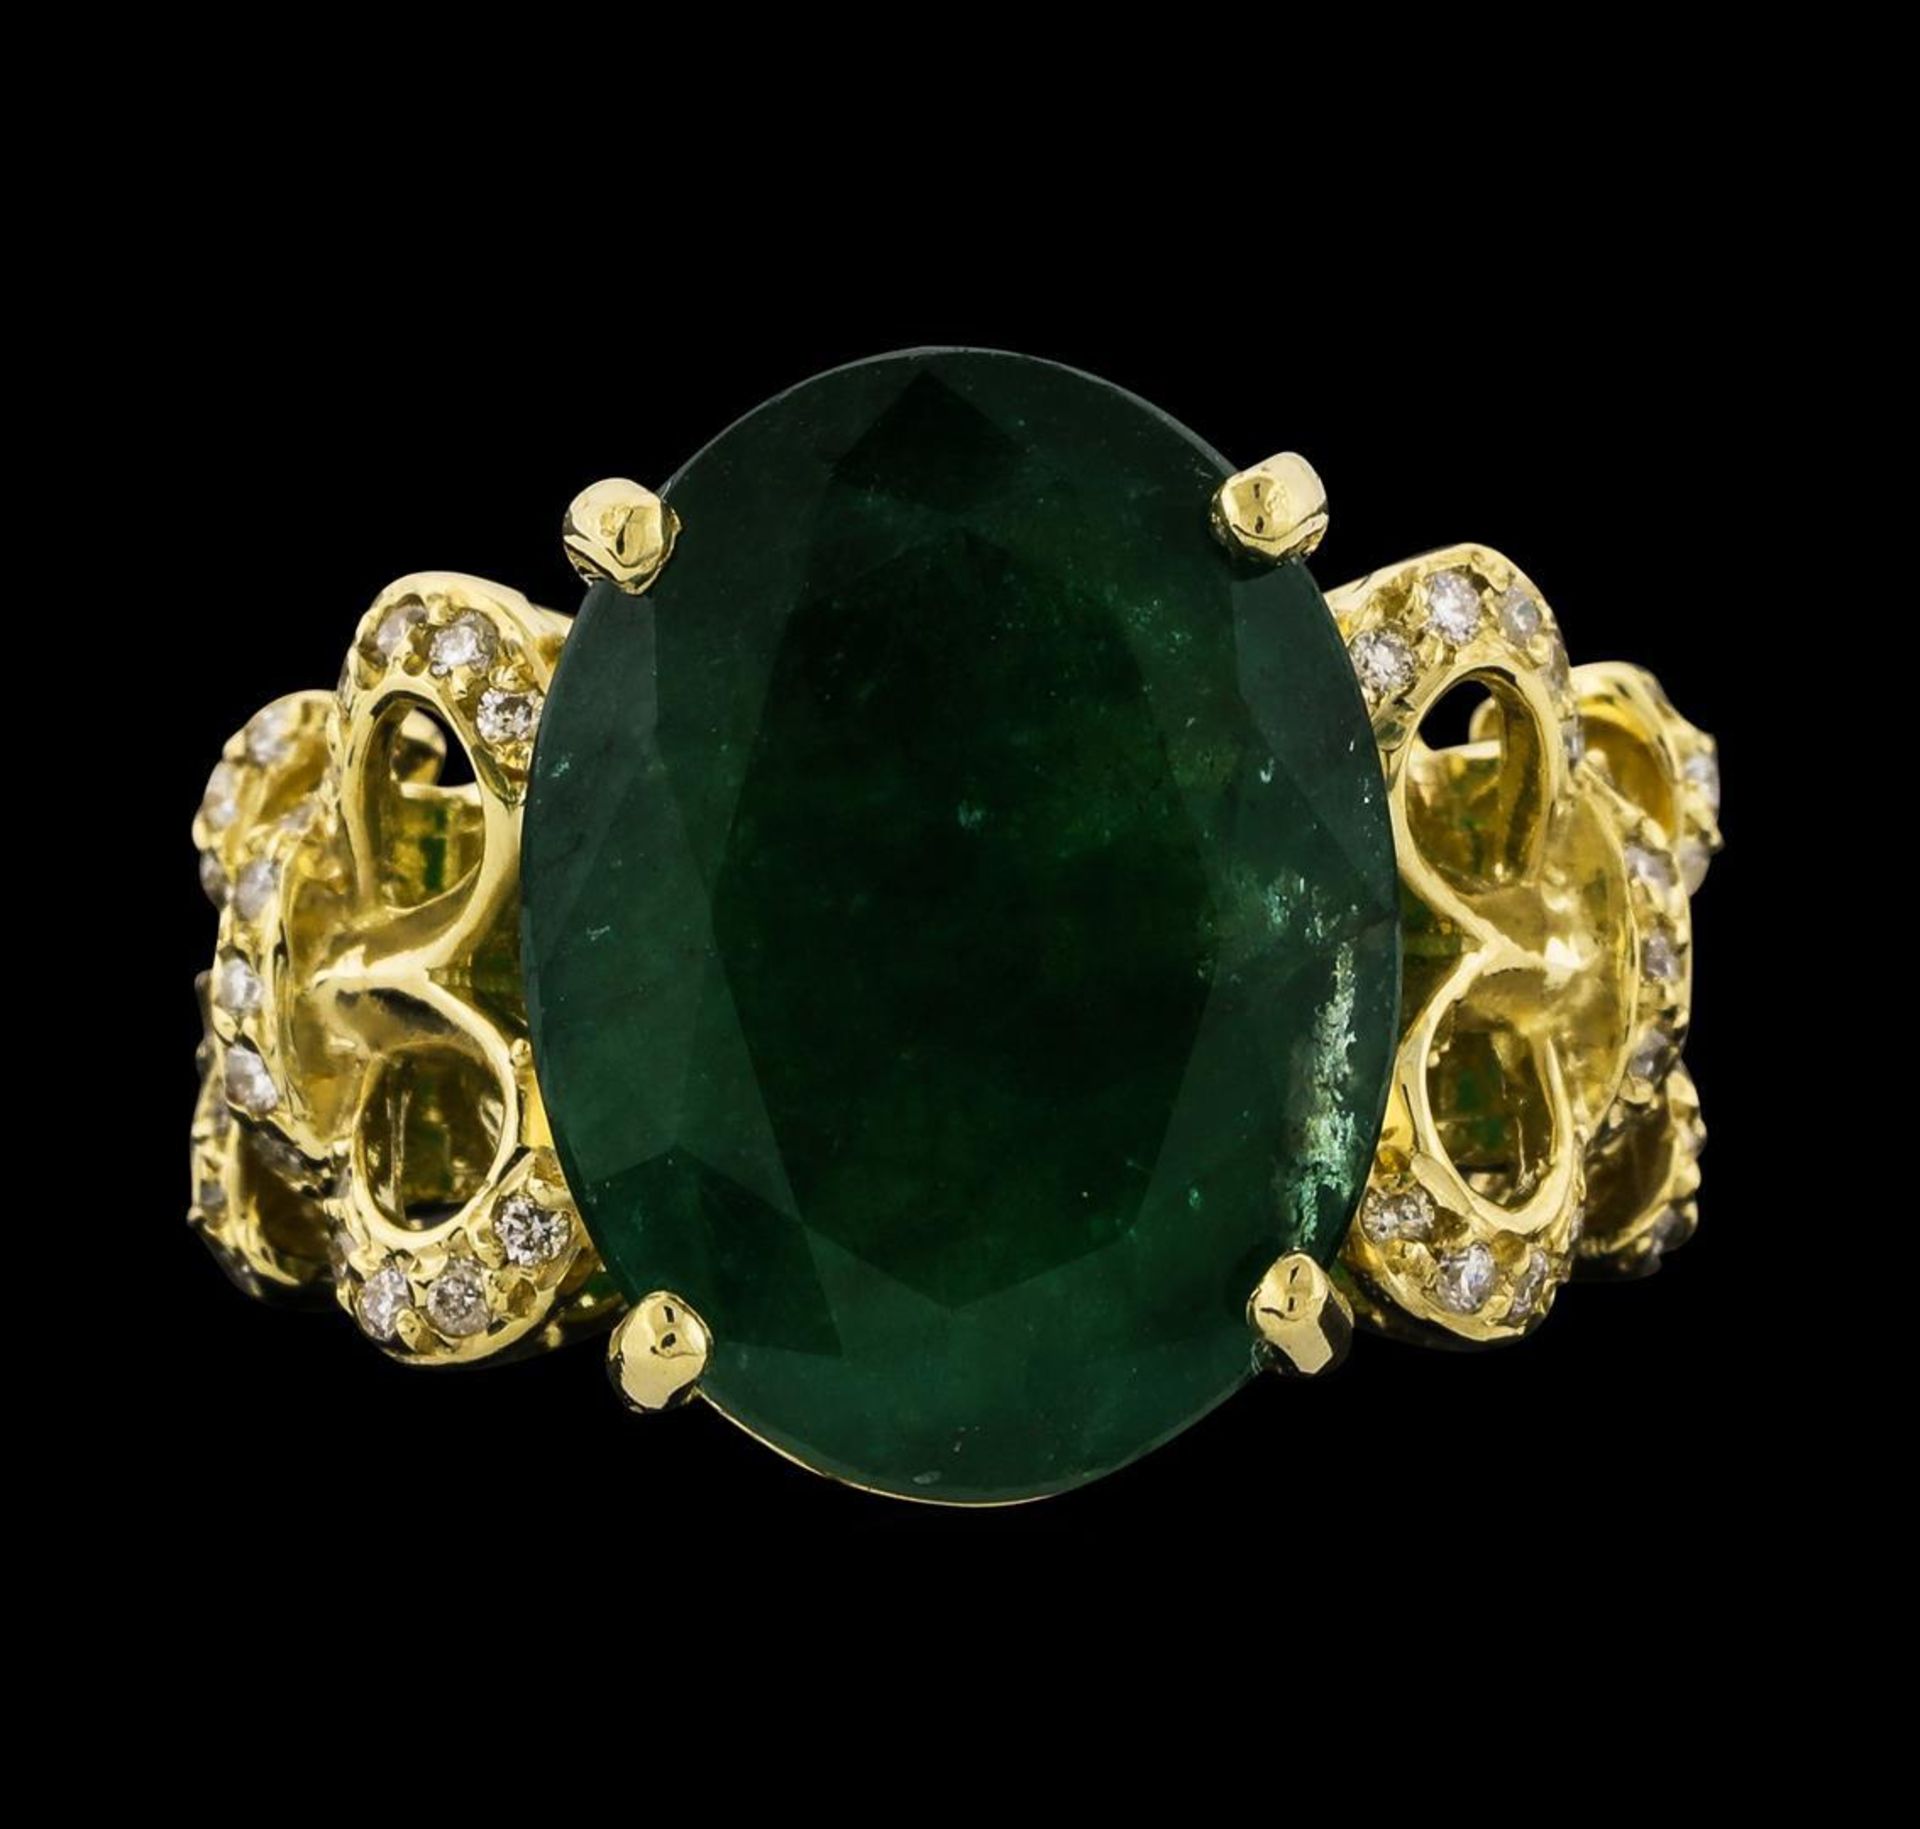 8.71 ctw Emerald and Diamond Ring - 14KT Yellow Gold - Image 2 of 5